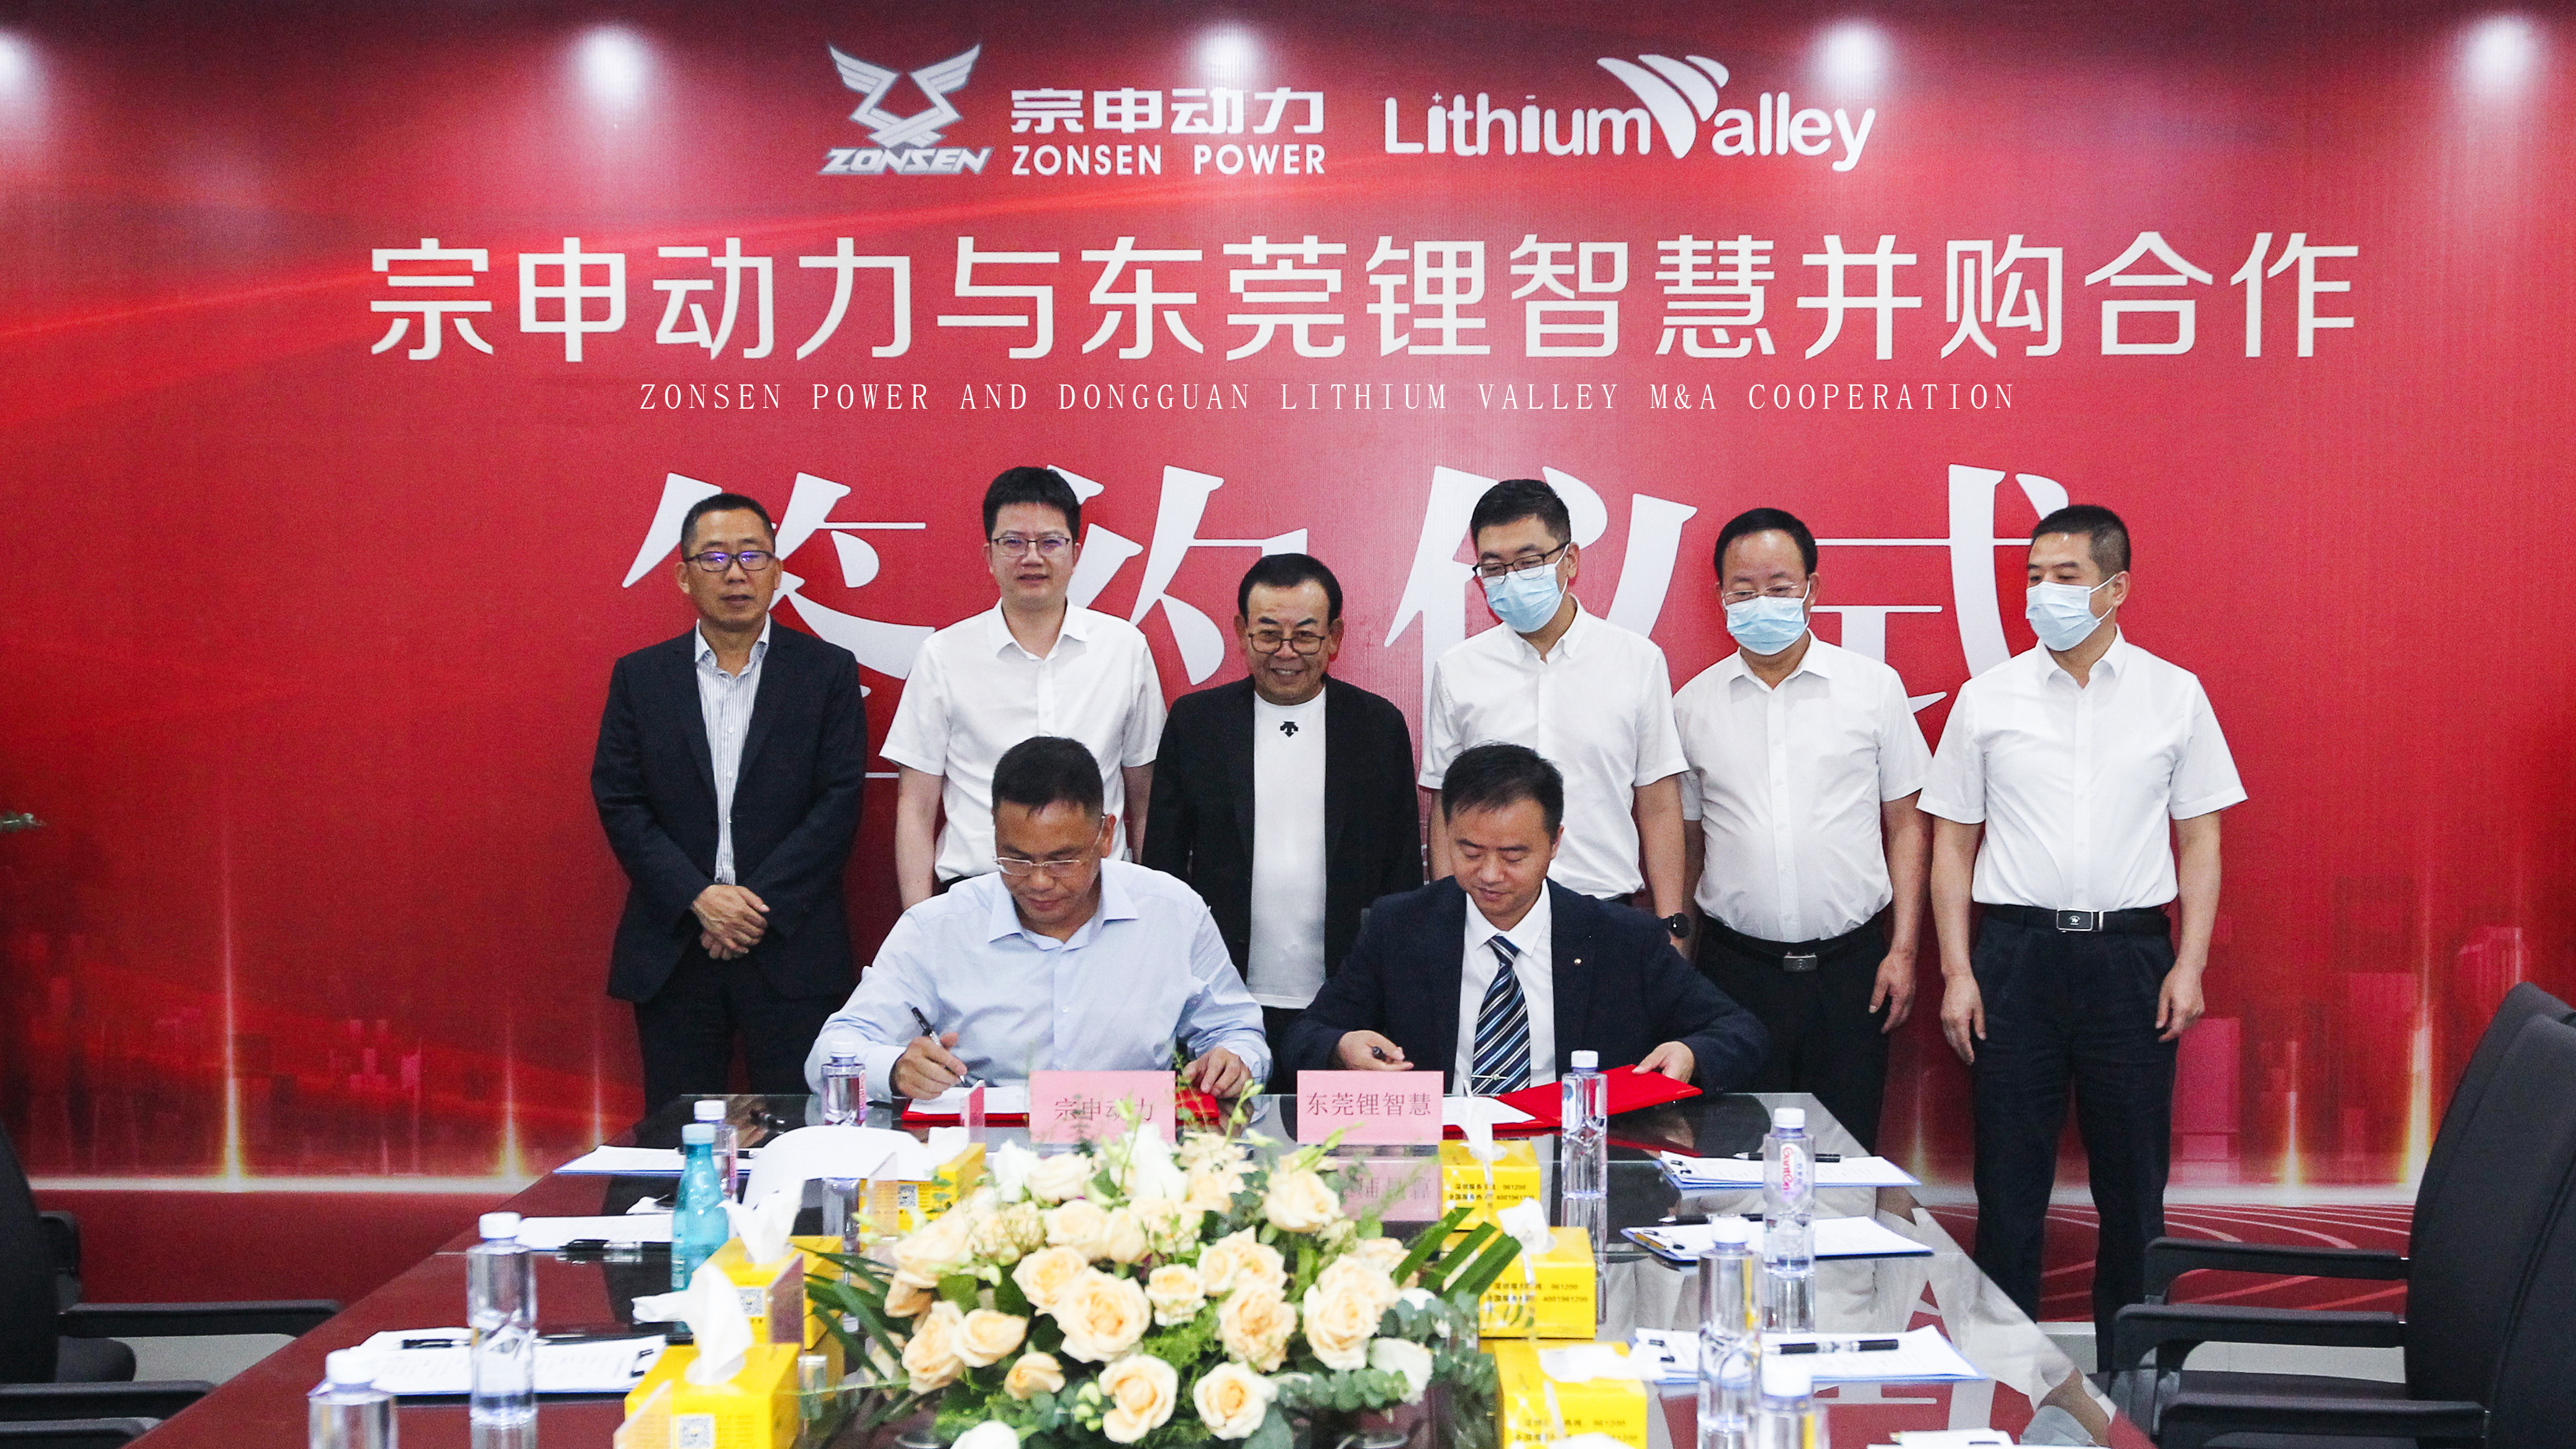 Zongshen Power and Lithium Valley Merger Agreement